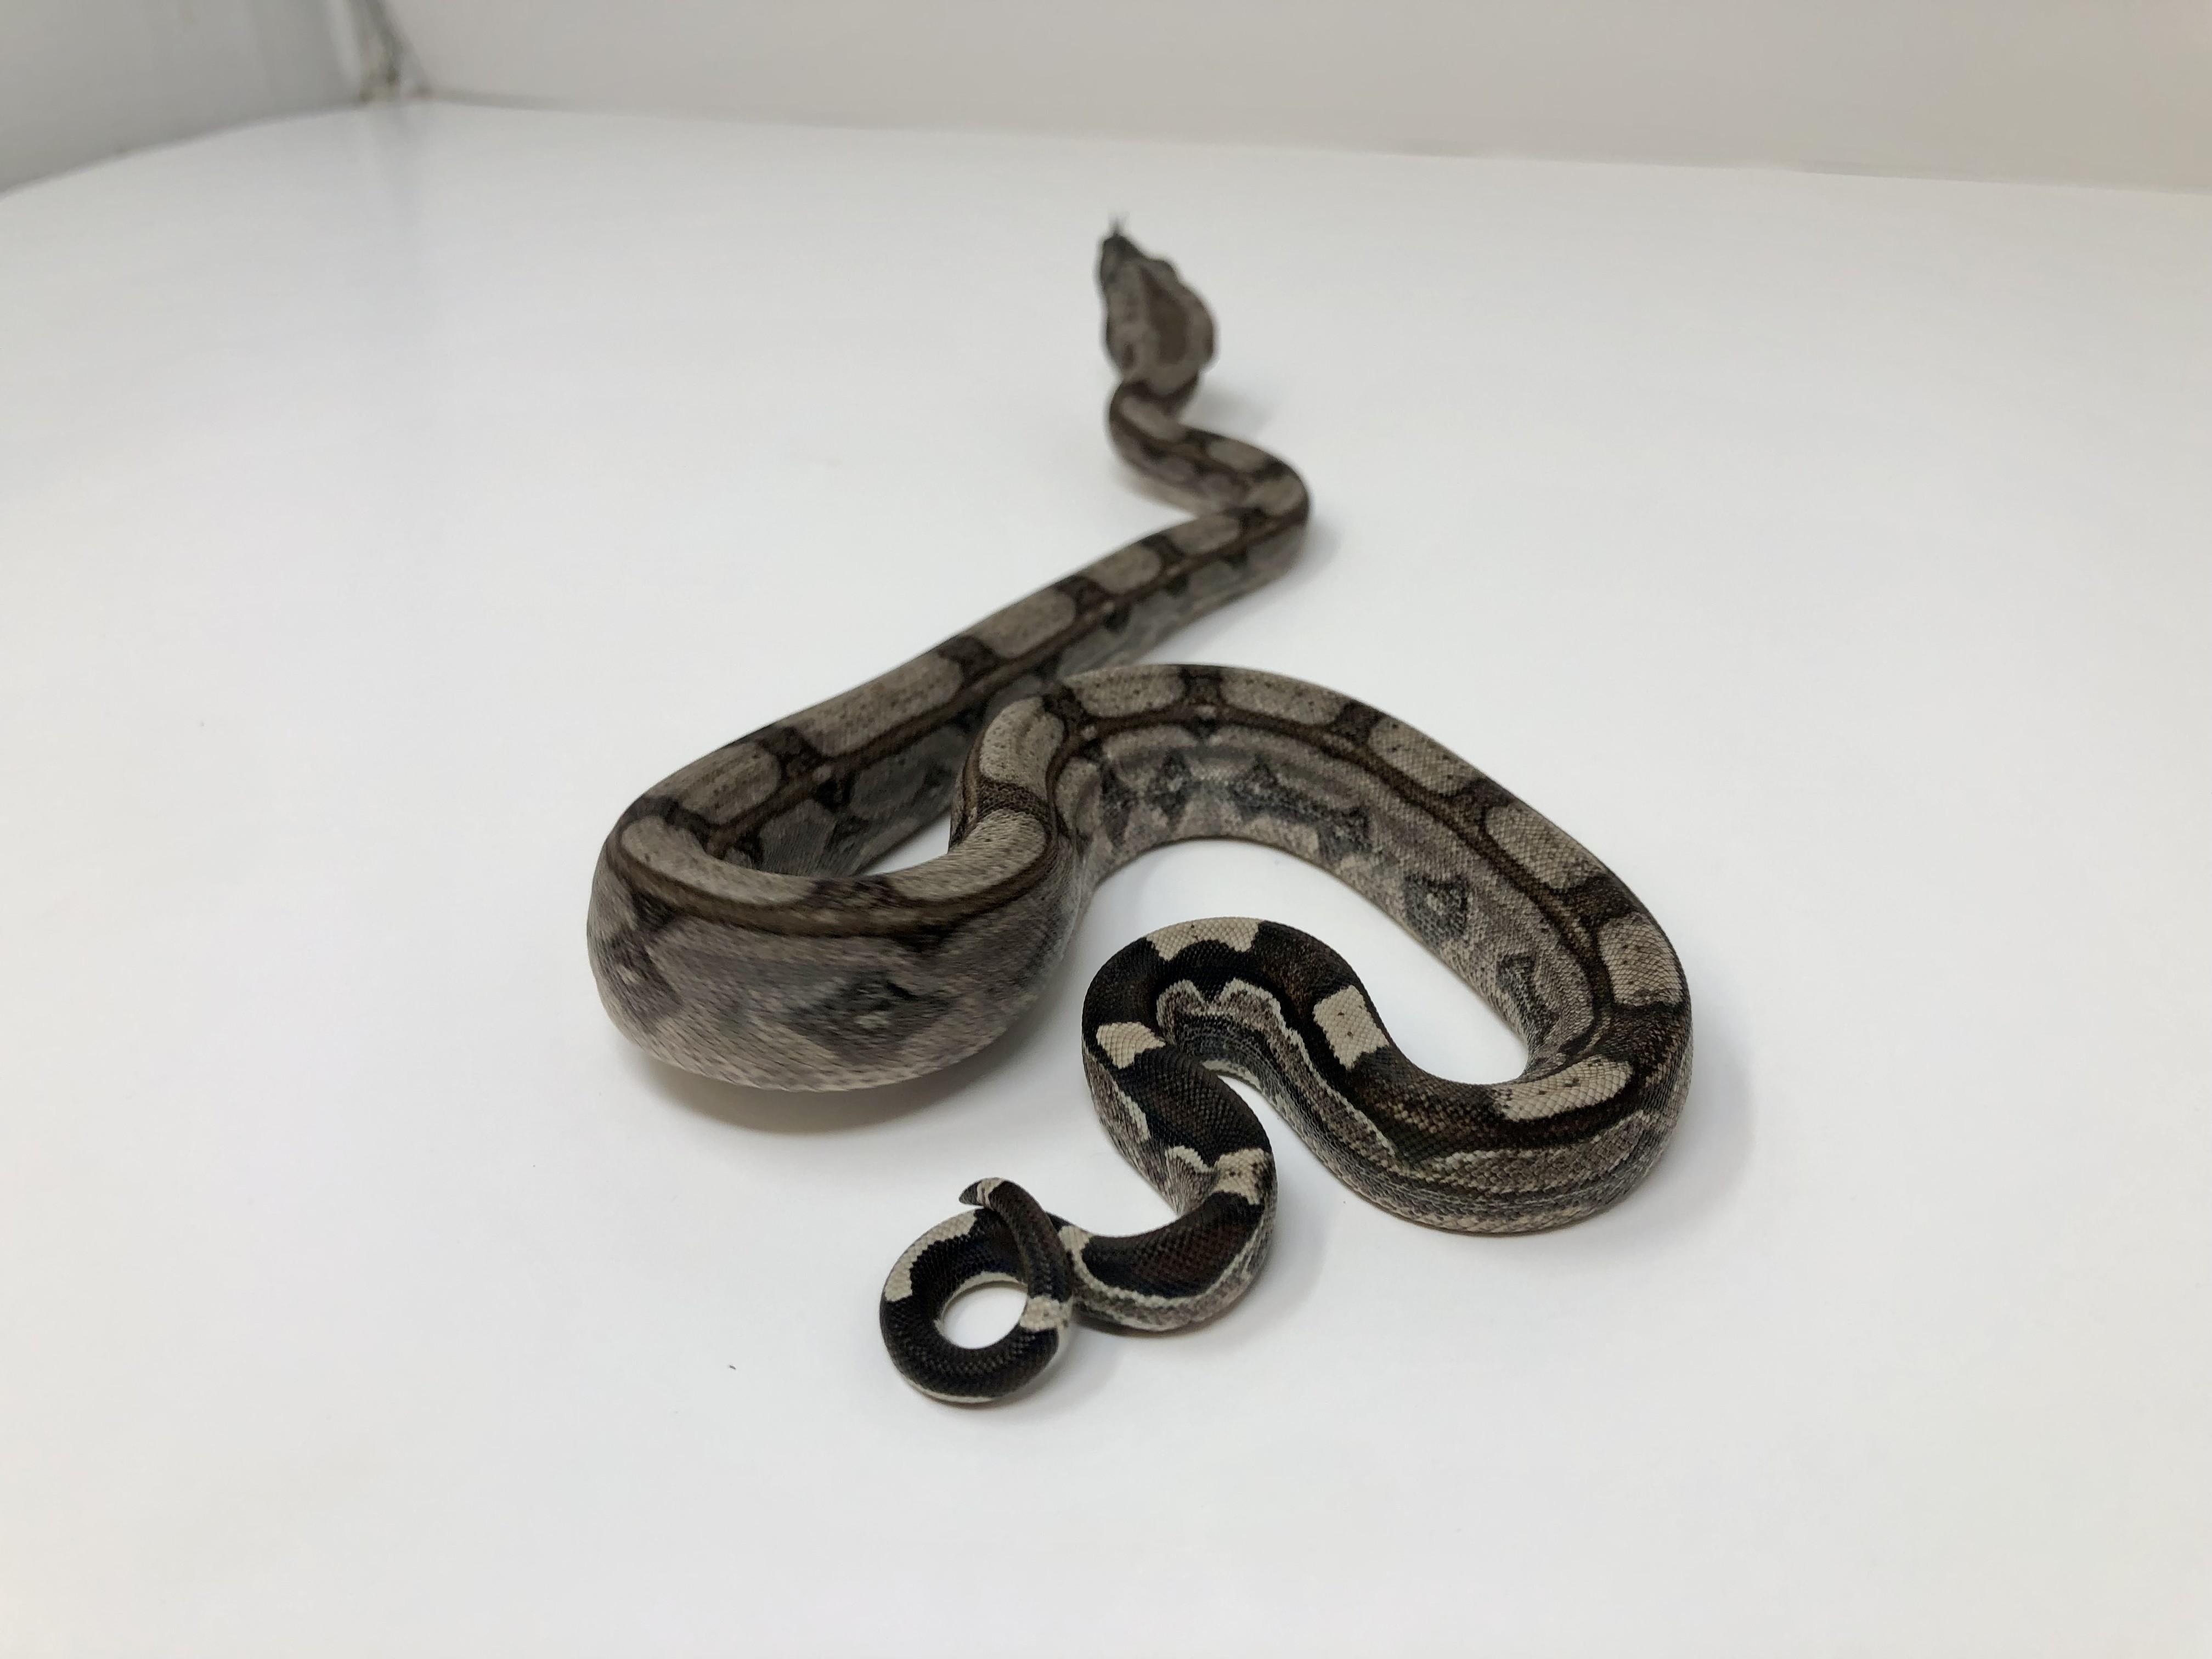 RLT Boa Constrictor by Good Guy Reptile Family